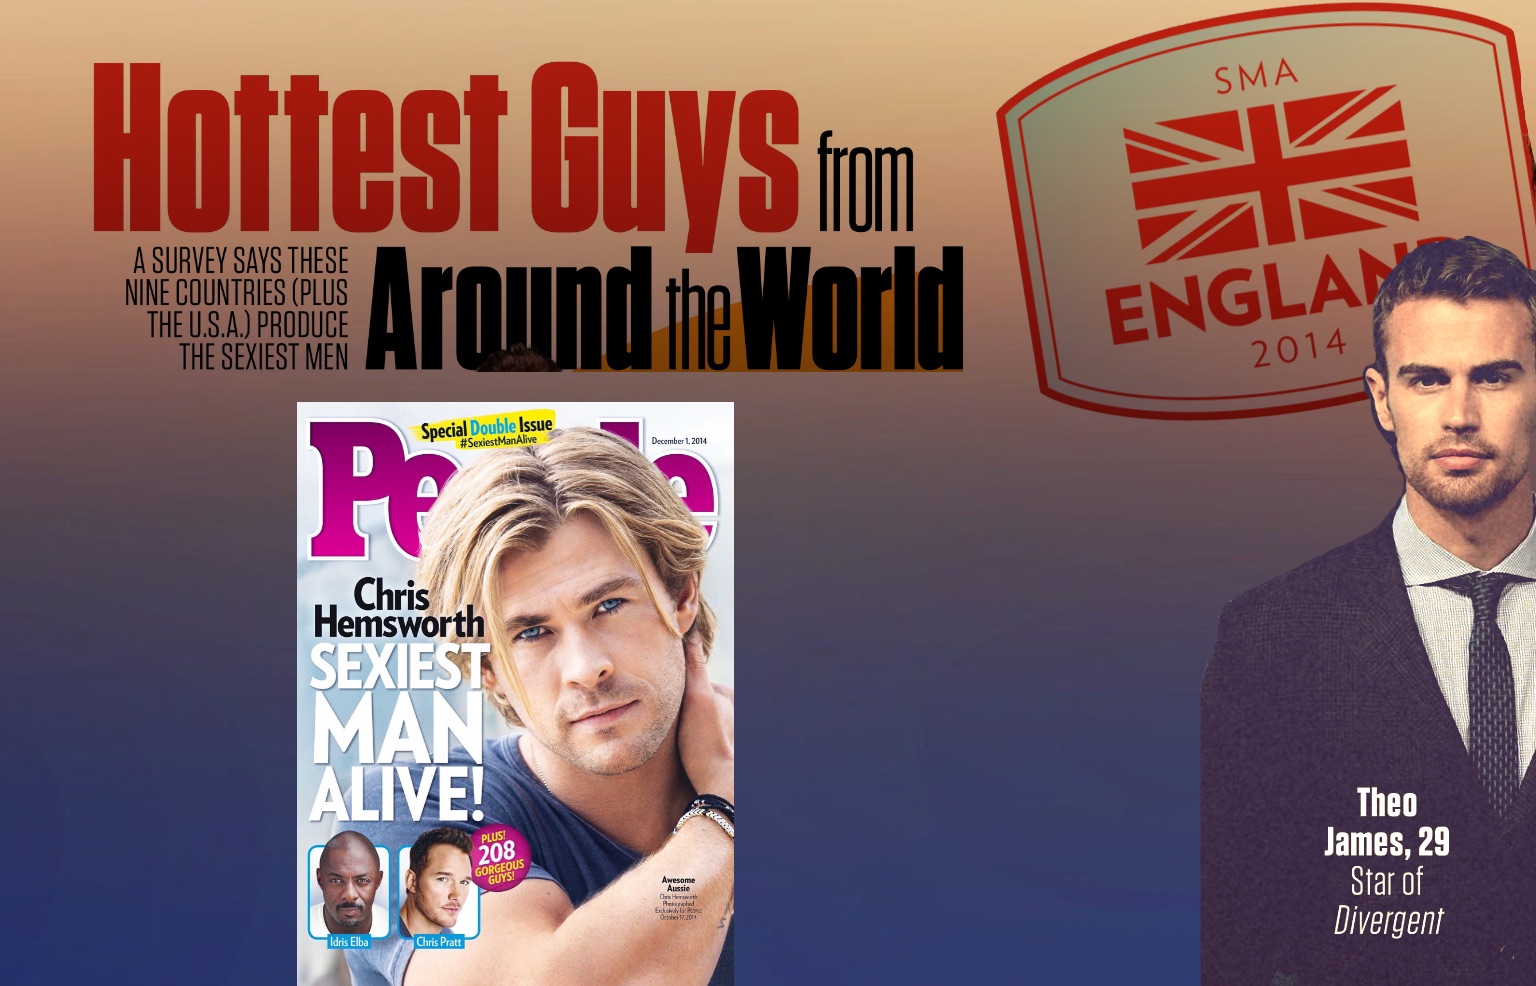 Theo James makes the list of People’s “Hottest Guys From Around The World – England”